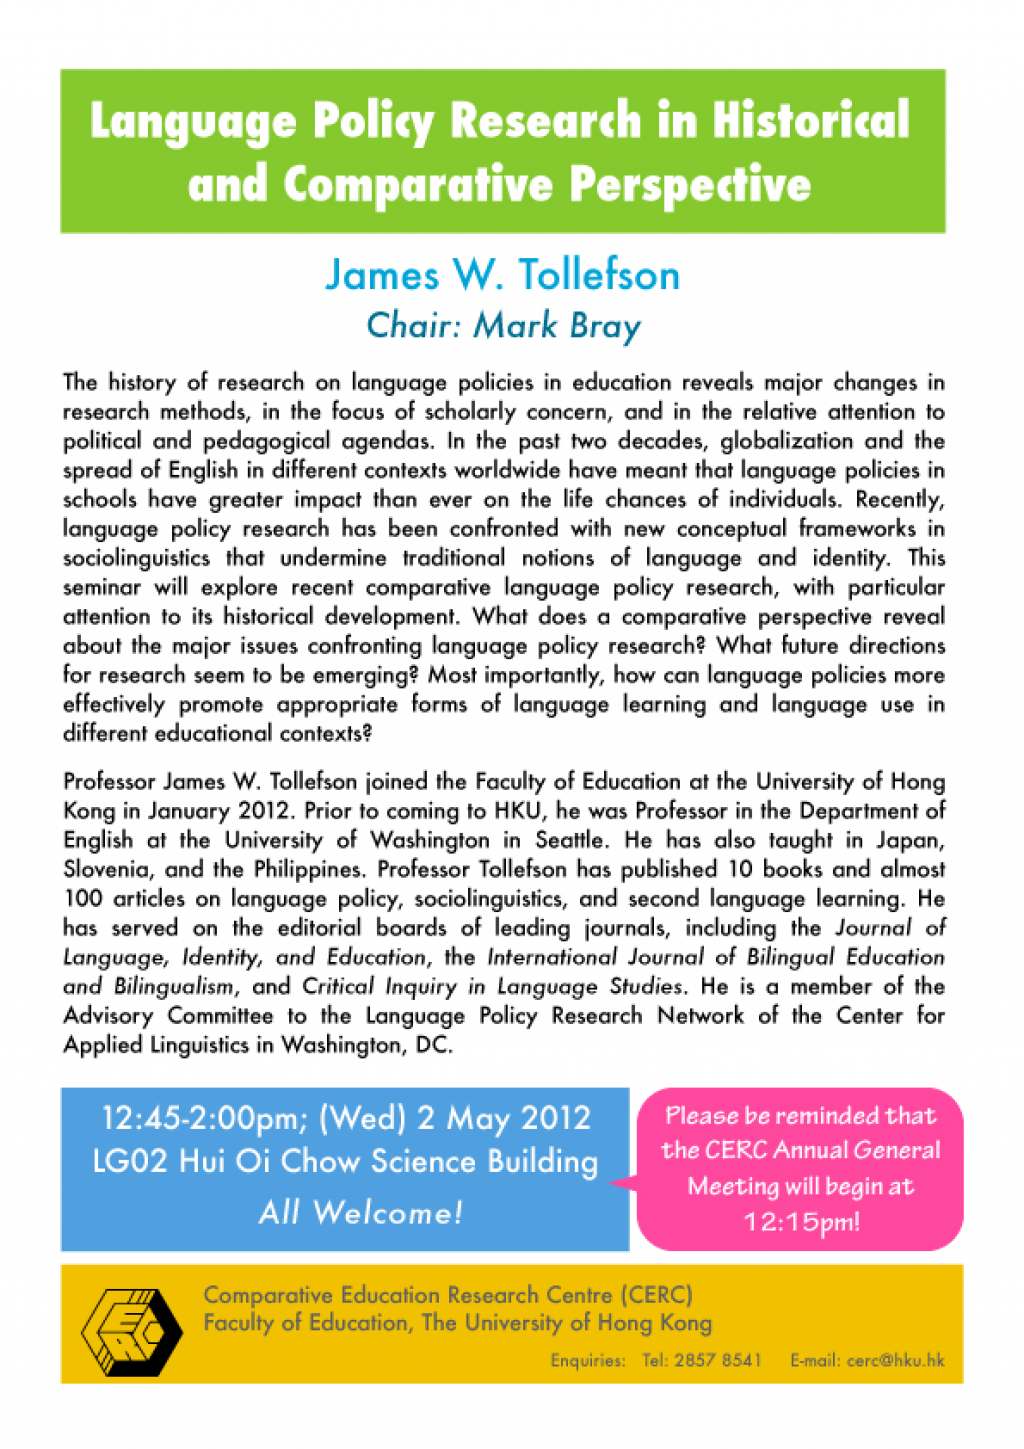 Seminar: Language Policy Research in Historical and Comparative Perspective